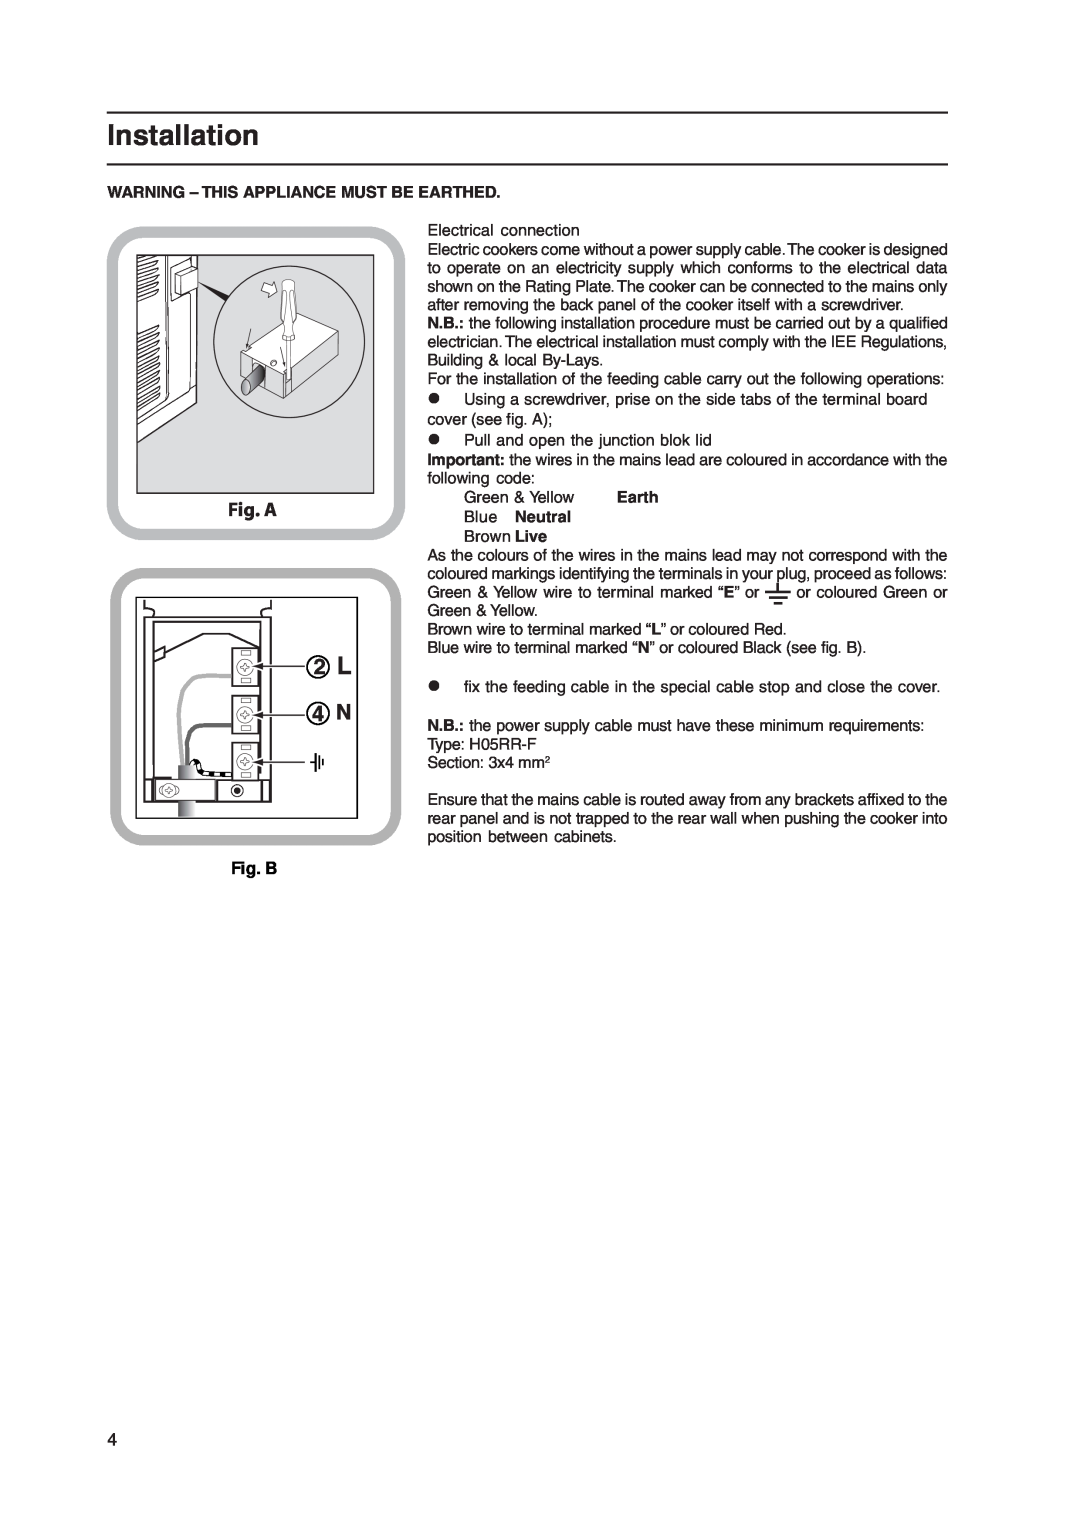 Hotpoint 51TCW, EK50 EW50, C358EWH Installation, Fig. A, Fig. B, Warning – This Appliance Must Be Earthed, Blue Neutral 